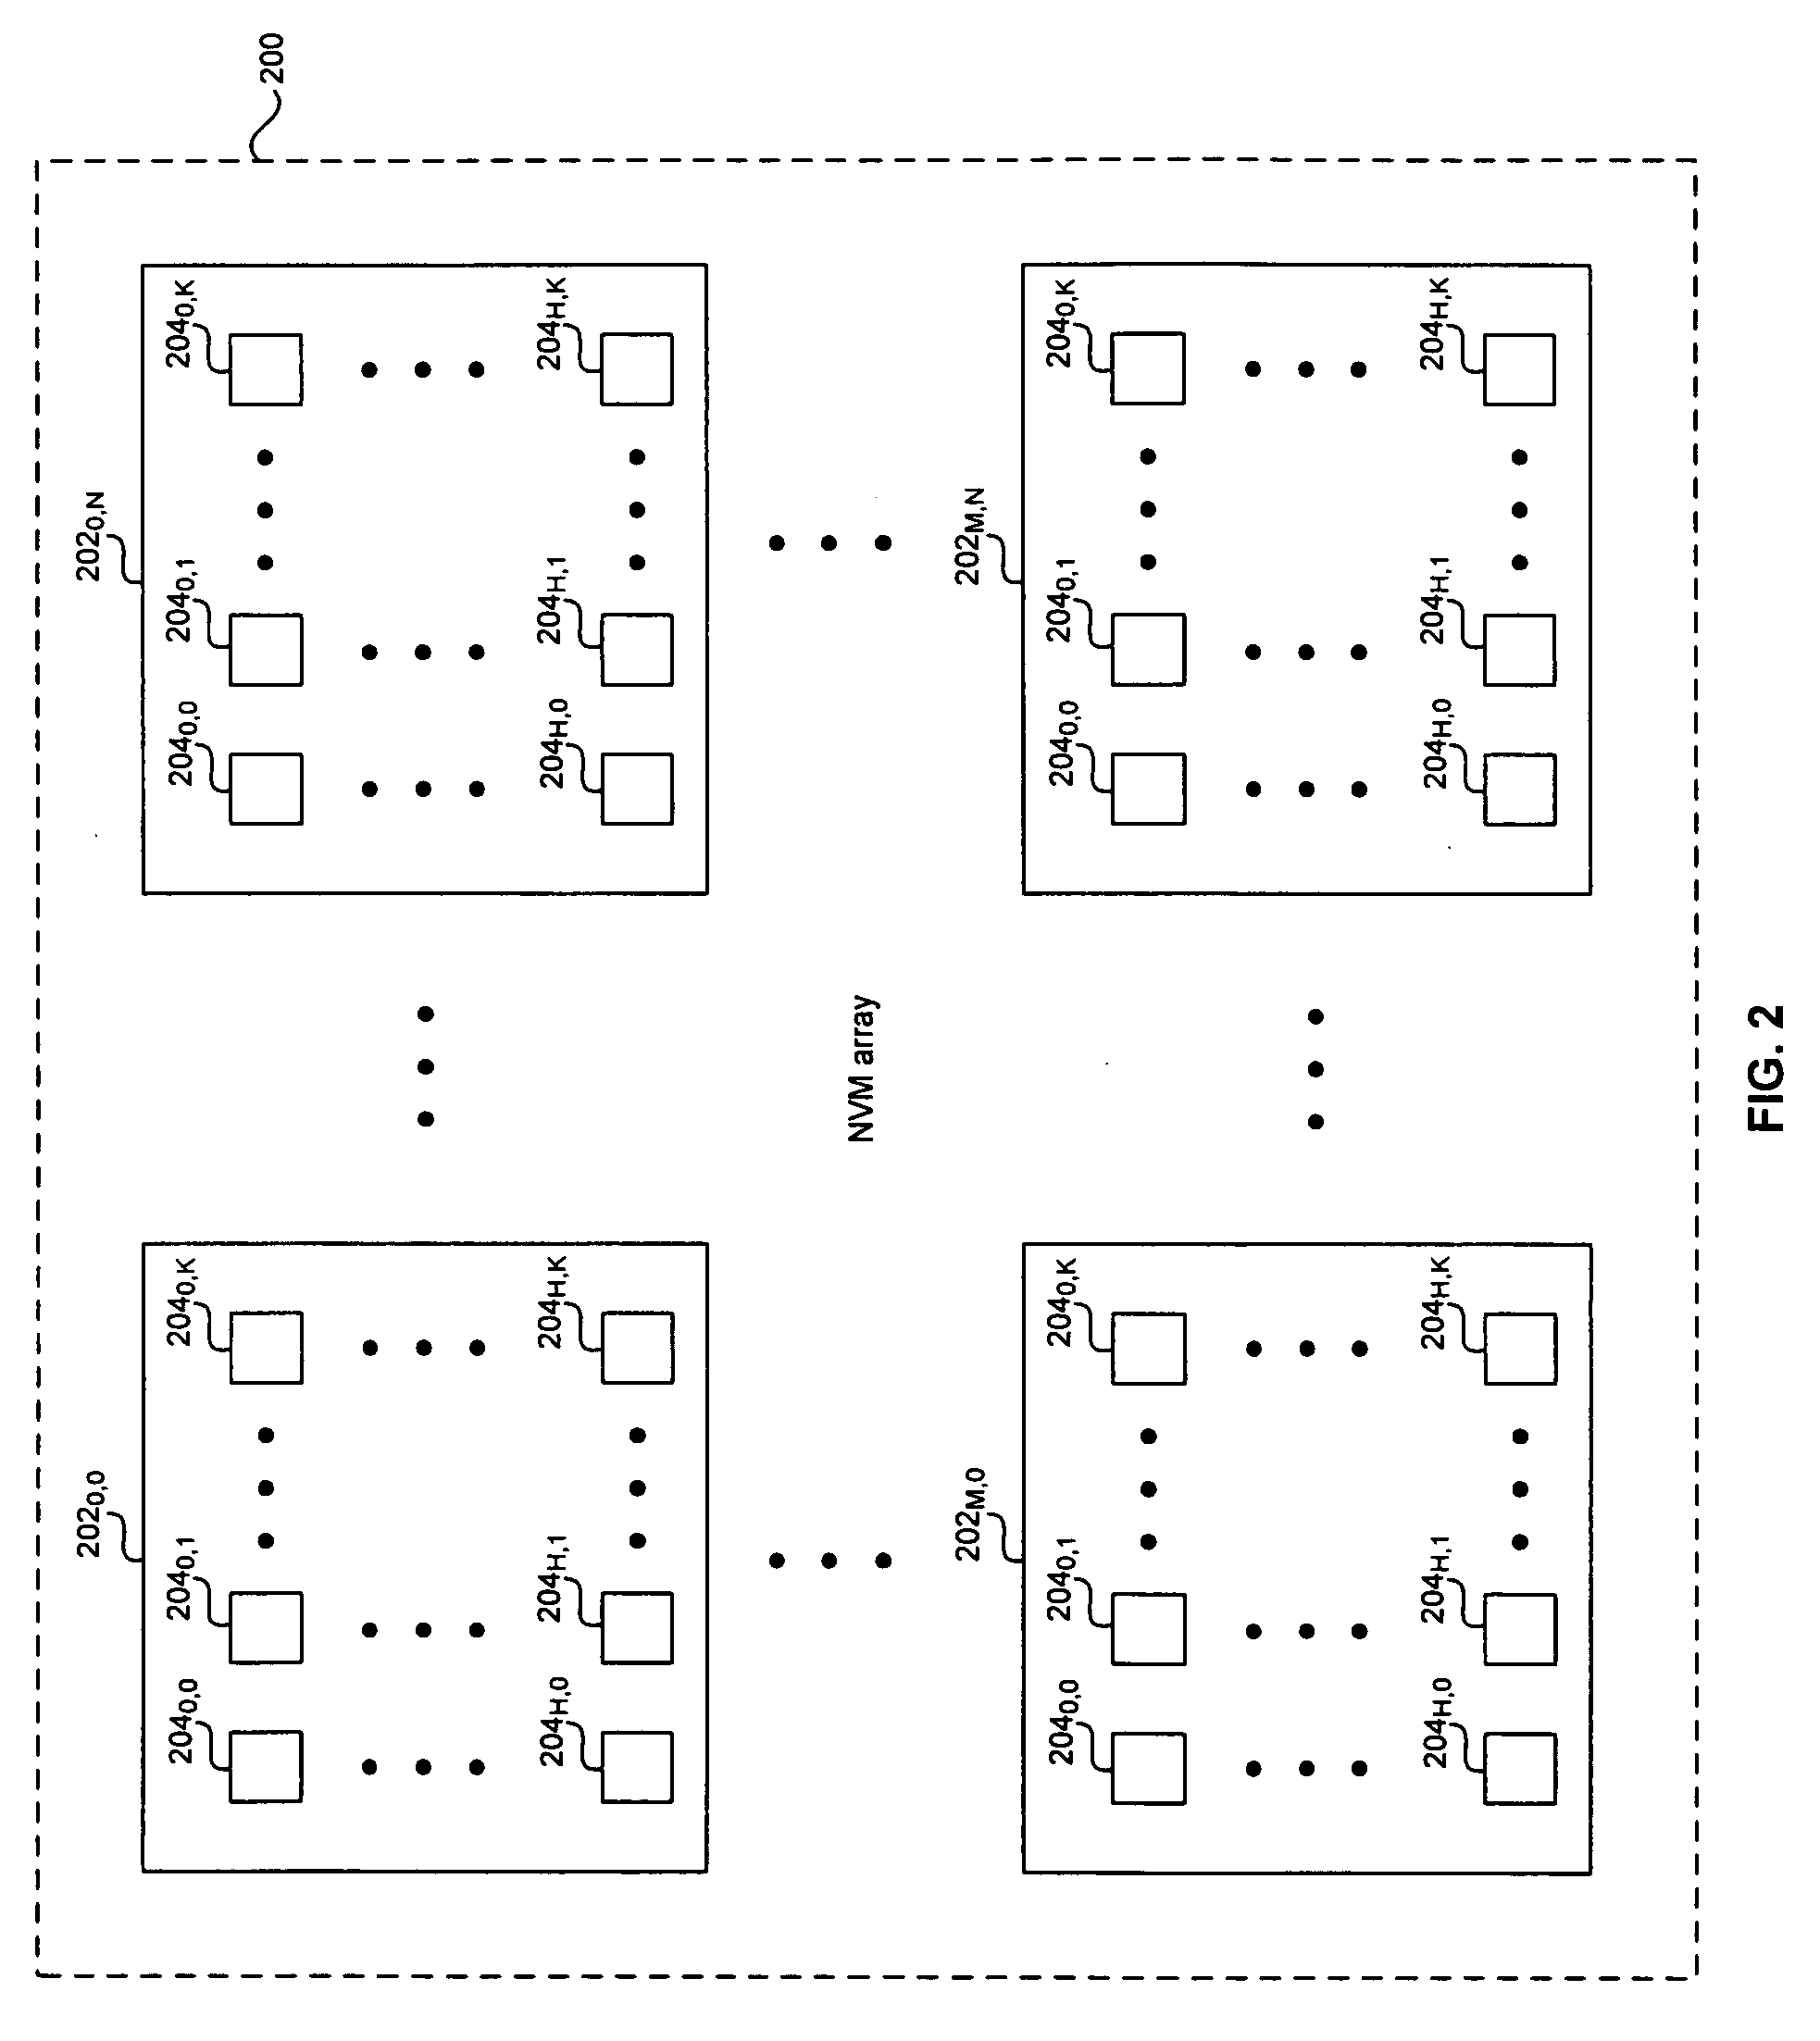 Method and system for a non-volatile memory with multiple bits error correction and detection for improving production yield